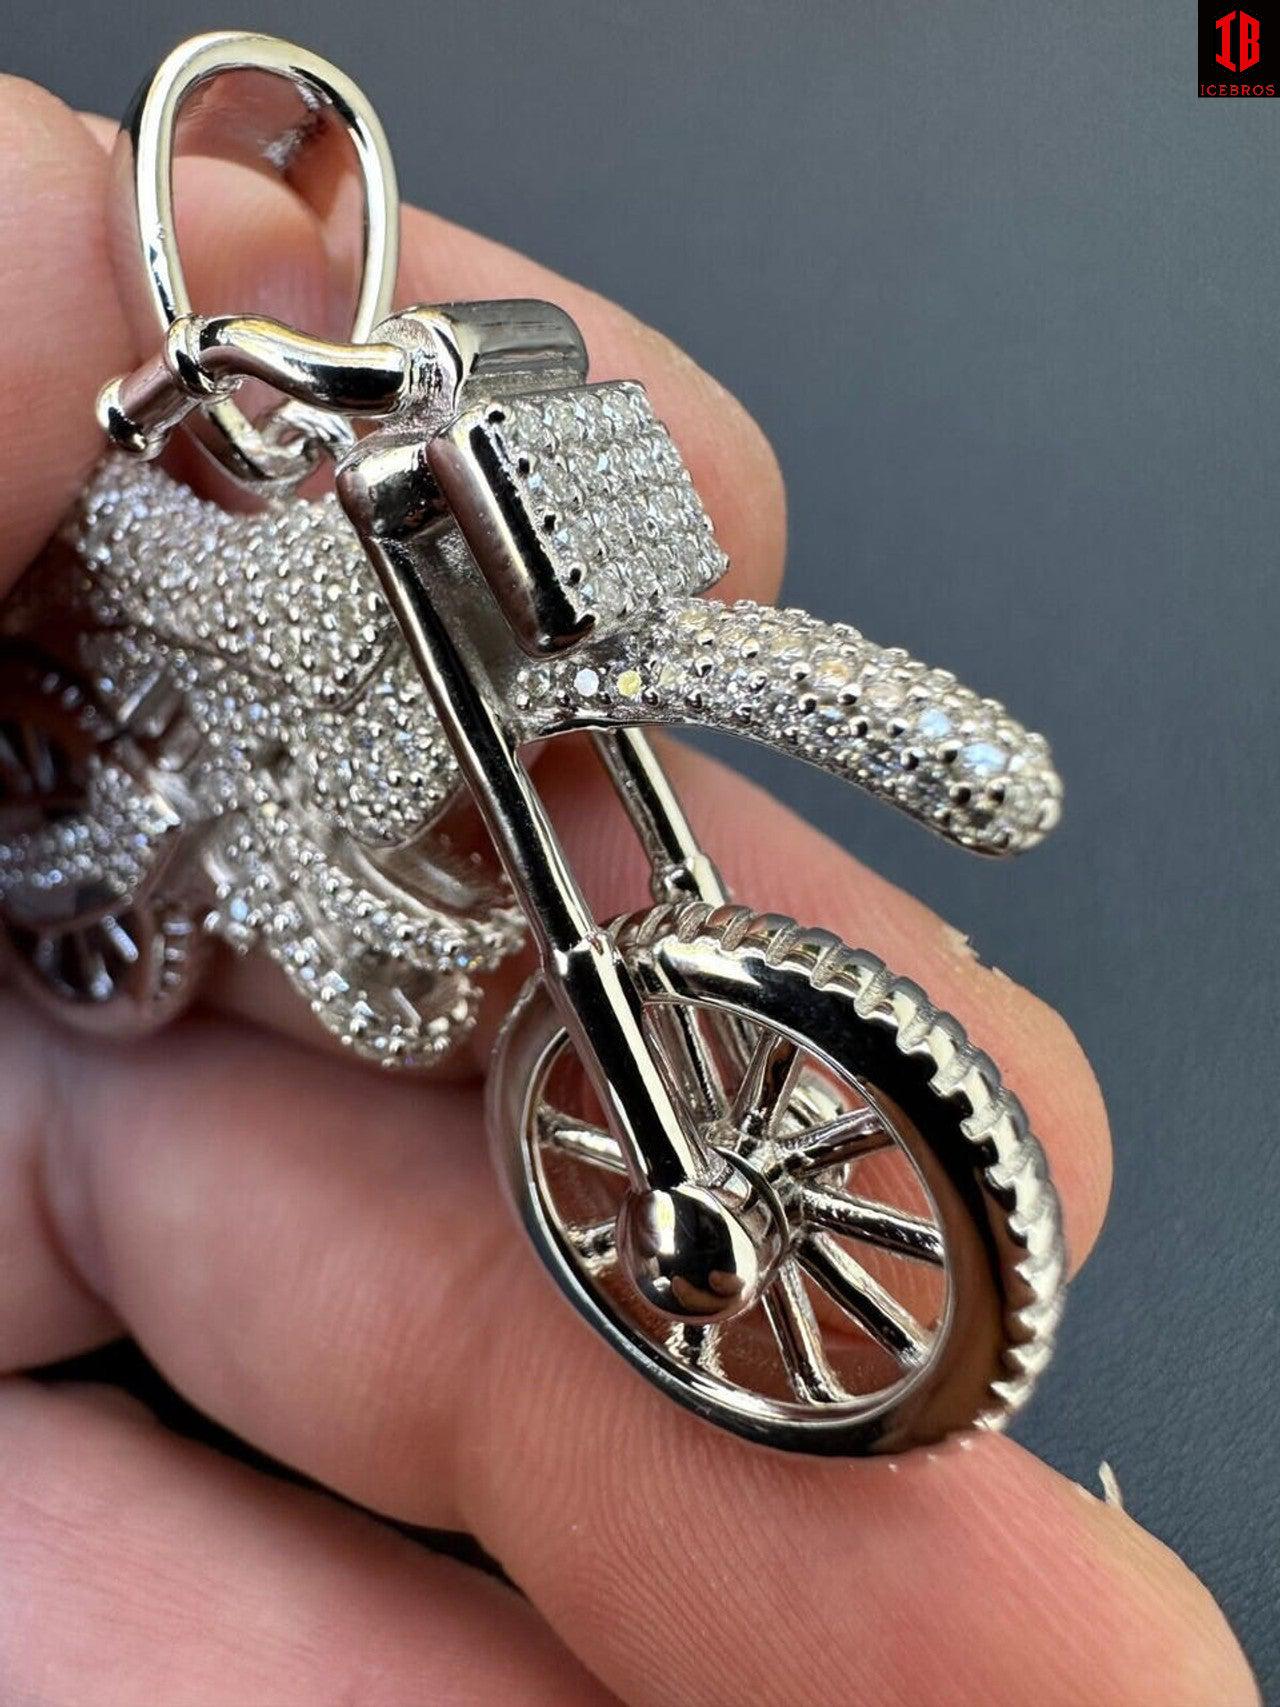 Closeup Of Moissanite Dirt Bike Pendant Necklace in 14k White Gold Plating and Flawless Round Moissanite Diamond Stones 